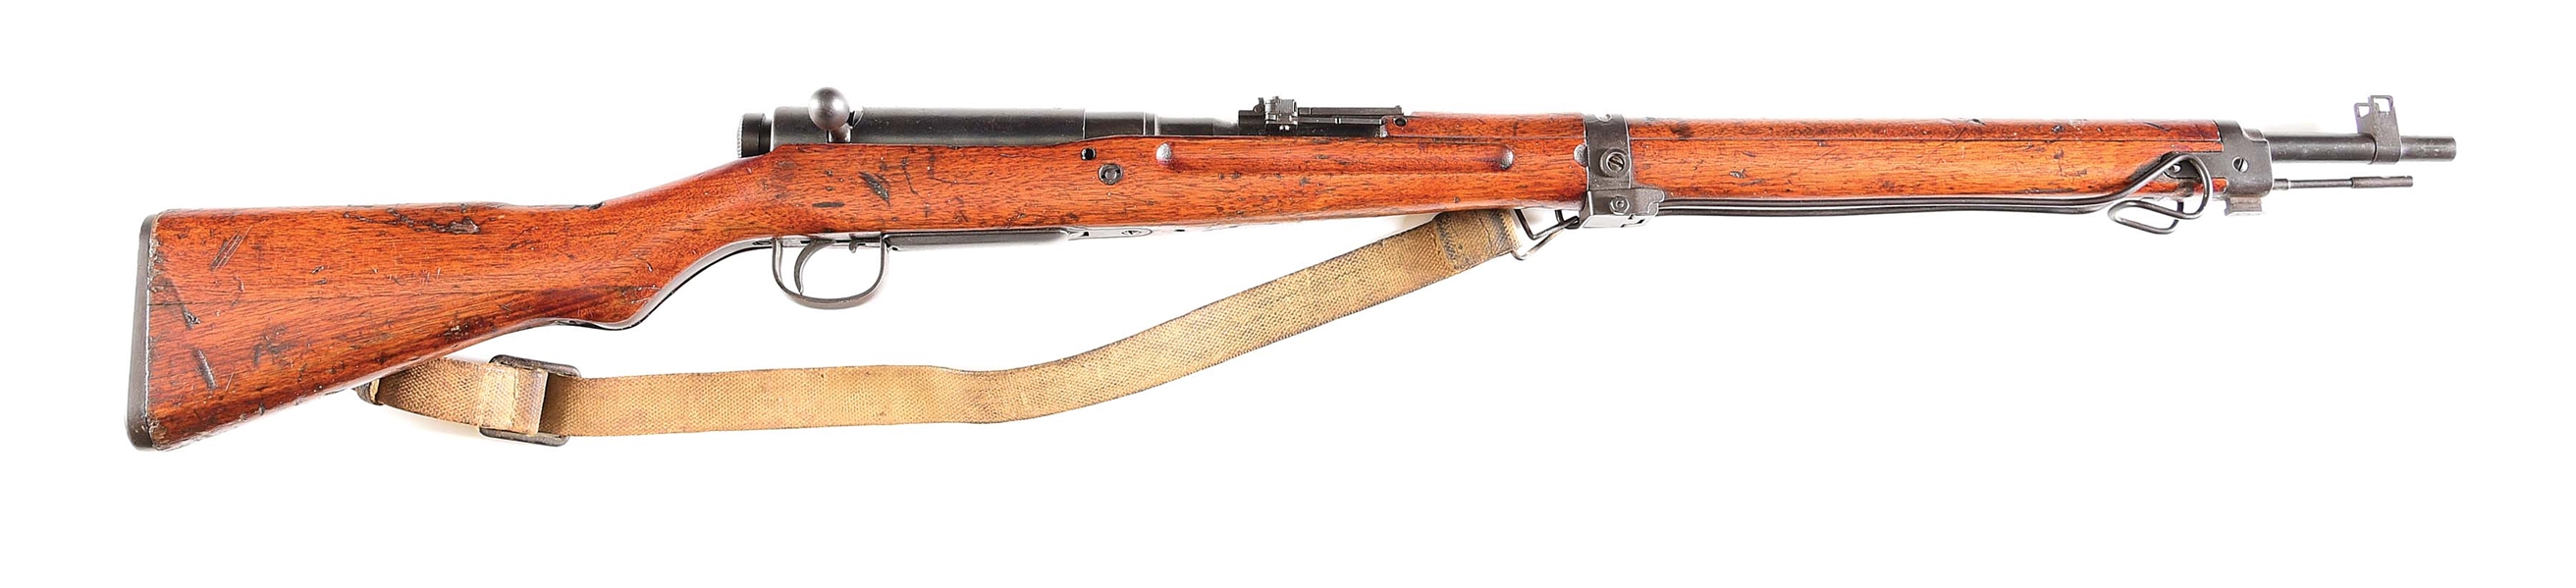 (C) NICE IMPERIAL JAPANESE TOYO KOGYO SERIES 30 TYPE 99 ARISAKA BOLT ACTION RIFLE WITH DUST COVER & SLING.